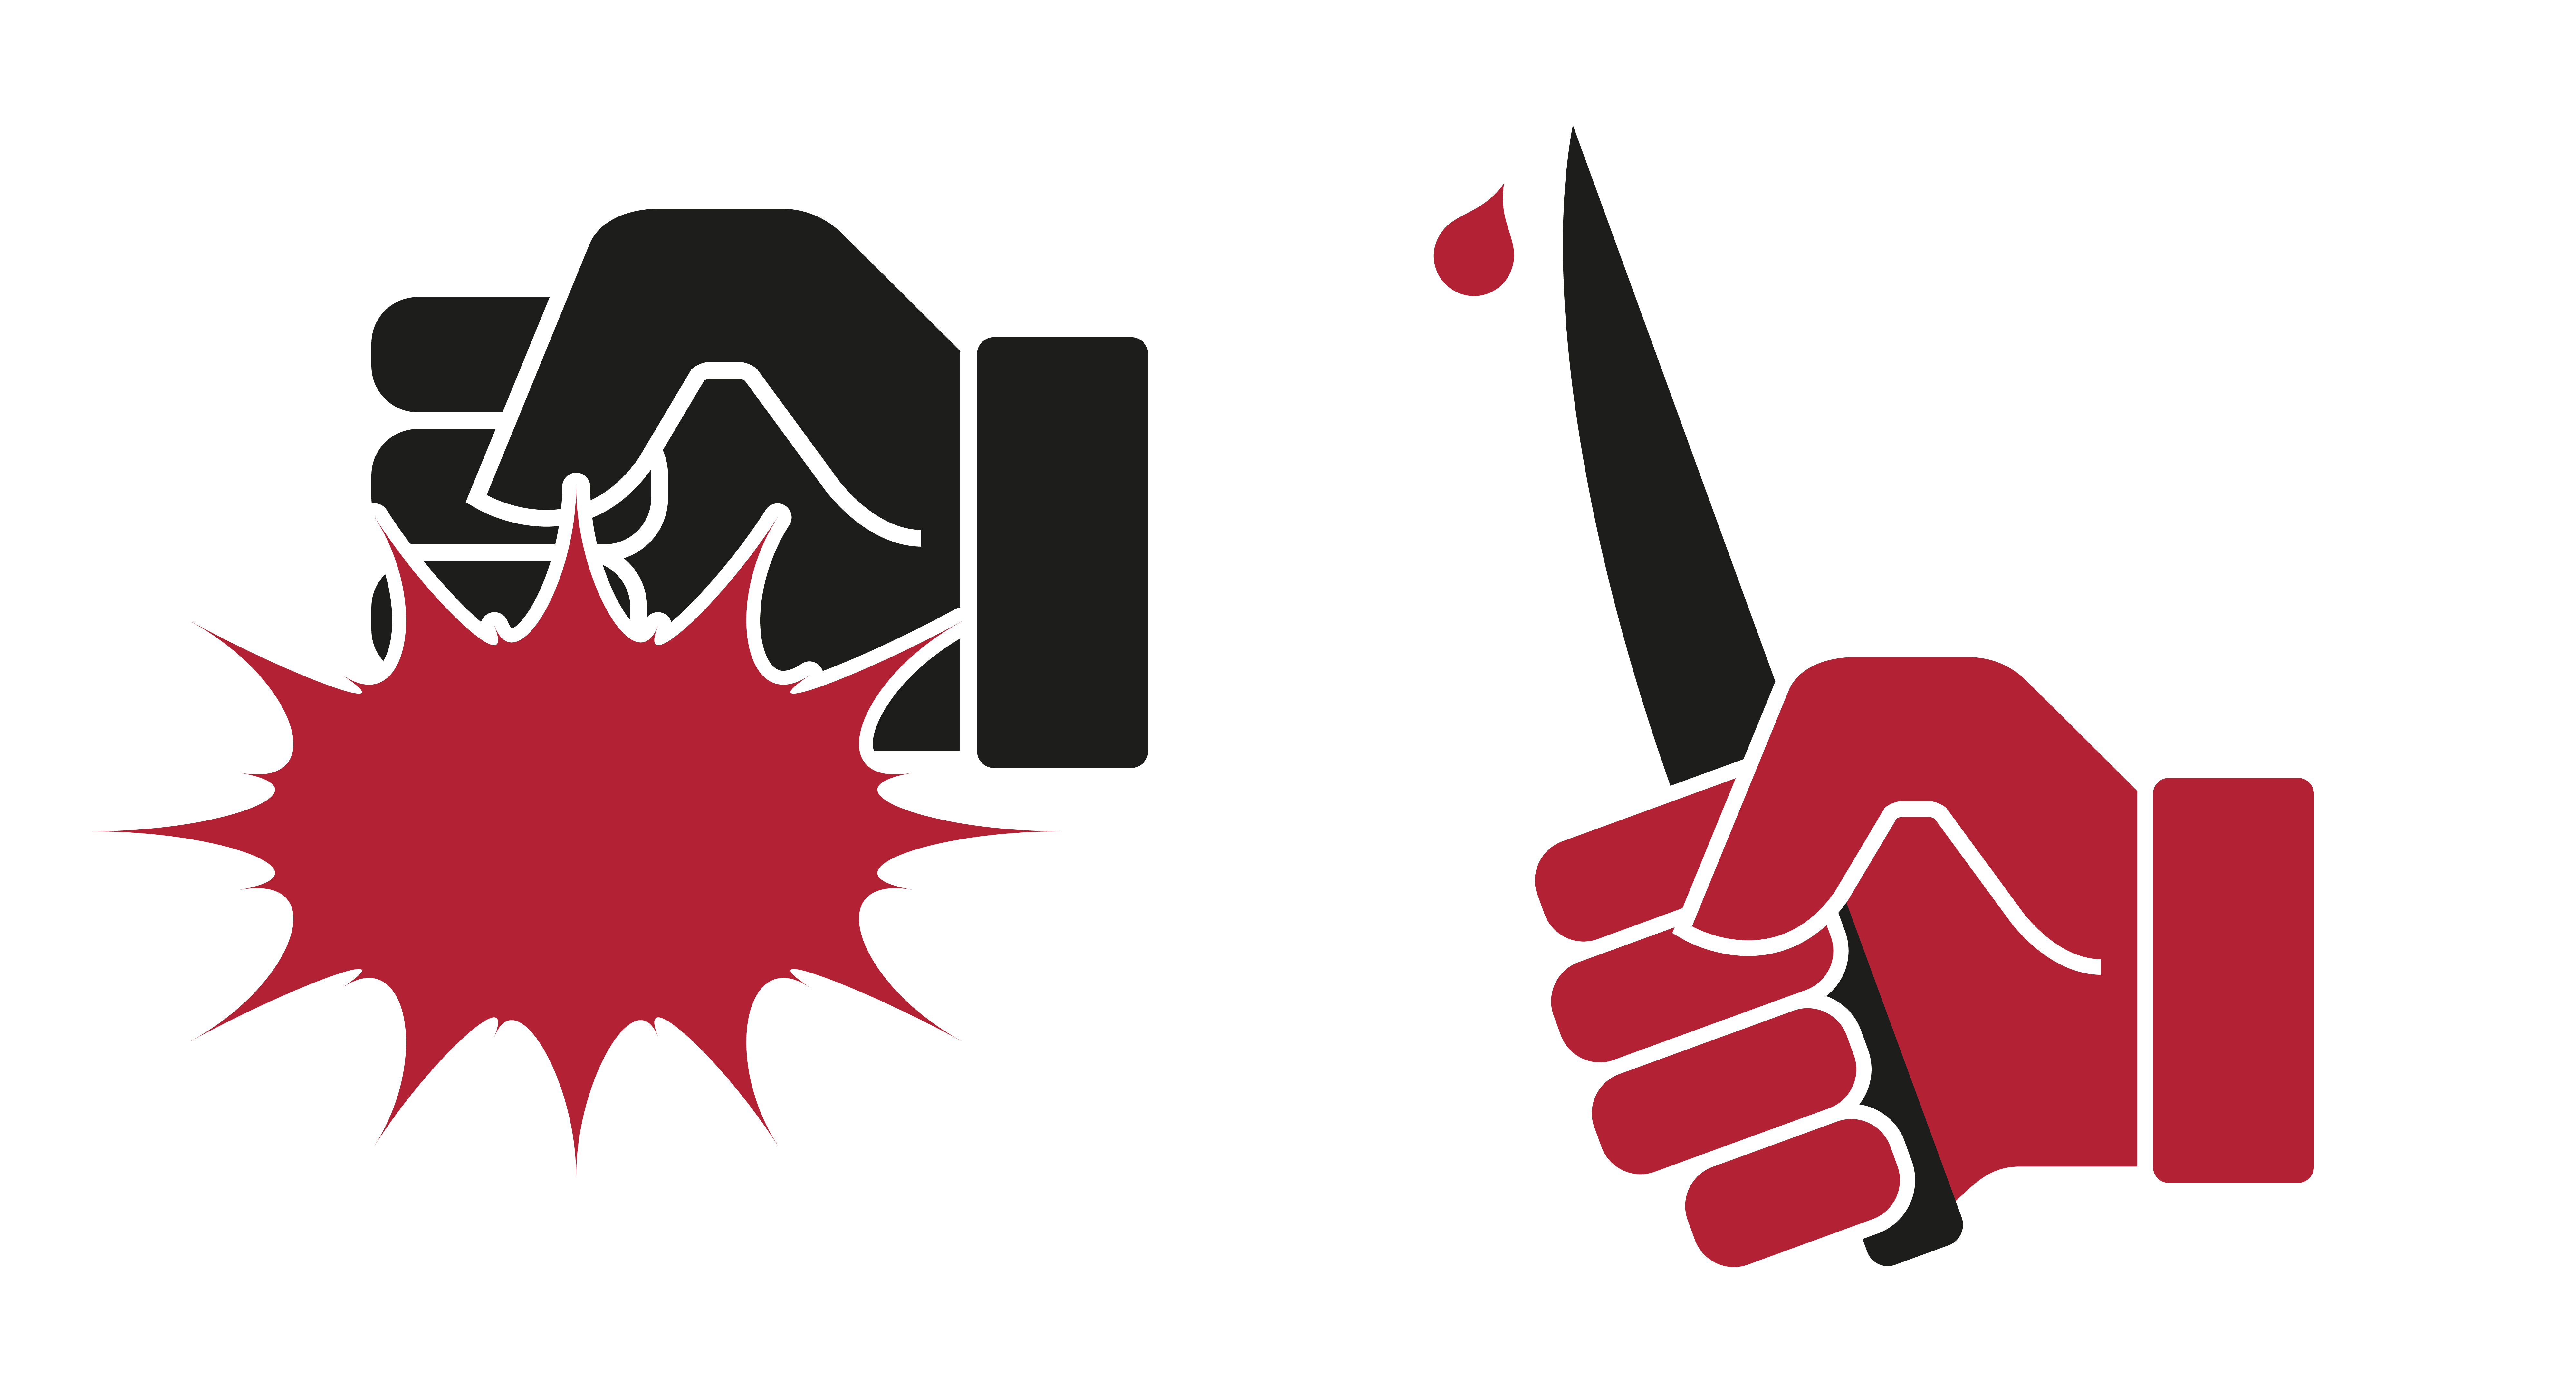 Demands, violence, hand beats, hand with a knife. Flat style vector illustration.. Demands, violence, hand beats, hand with a knife. Vector illustration